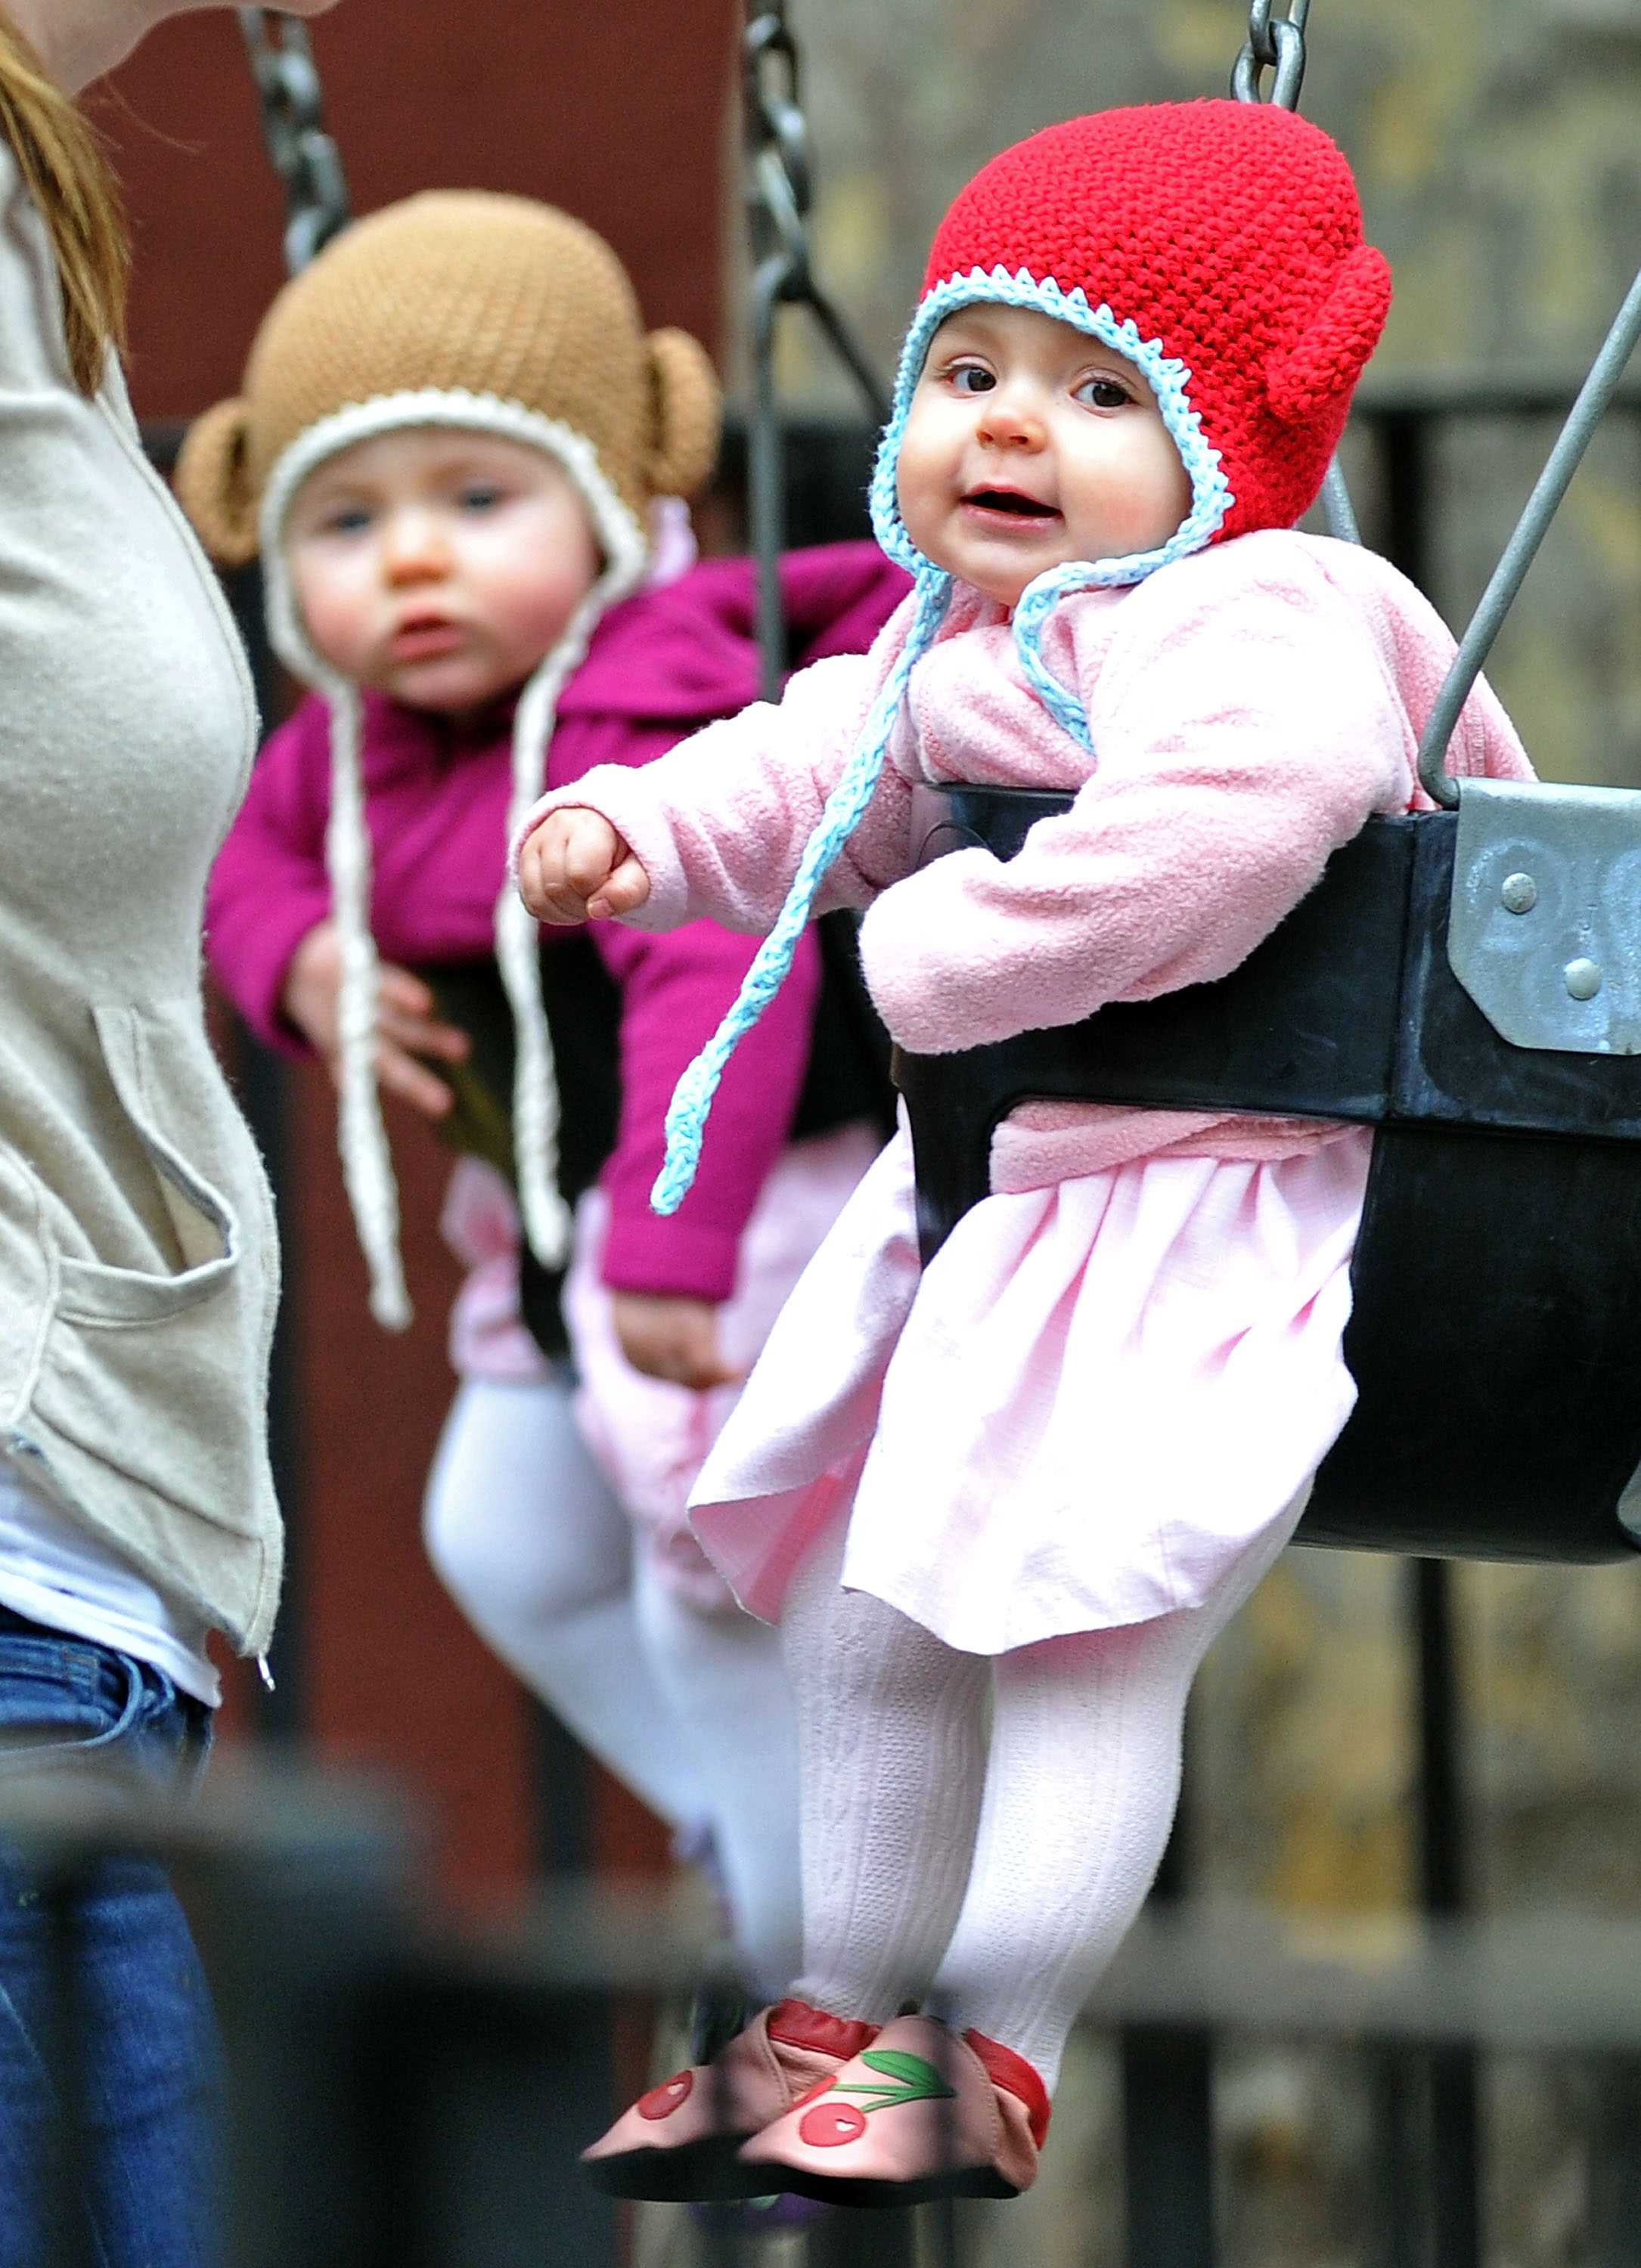 Marion Broderick and Tabitha Broderick photographed at a Manhattan playground on April 16, 2010, in New York City. | Source: Getty Images